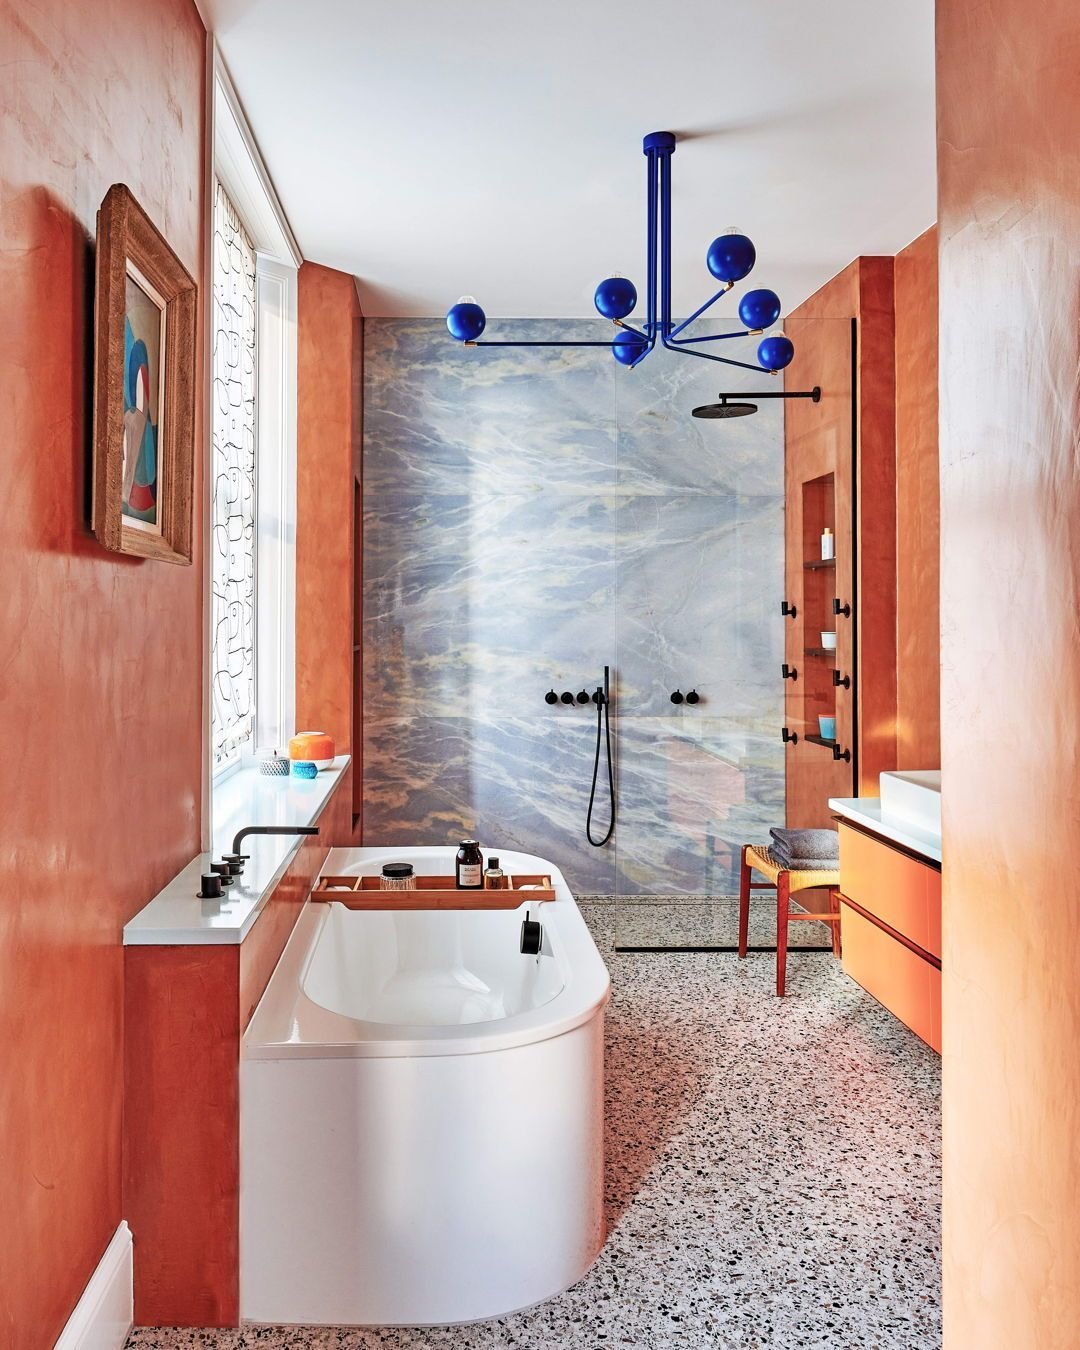 Crafting homes with balance, warmth, refinement, and individuality is our expertise. 

In this project, two bathrooms were transformed with terracotta micro-cement and sky-blue marble walls, creating a mid-century Moroccan 'house of glam' ambience. O